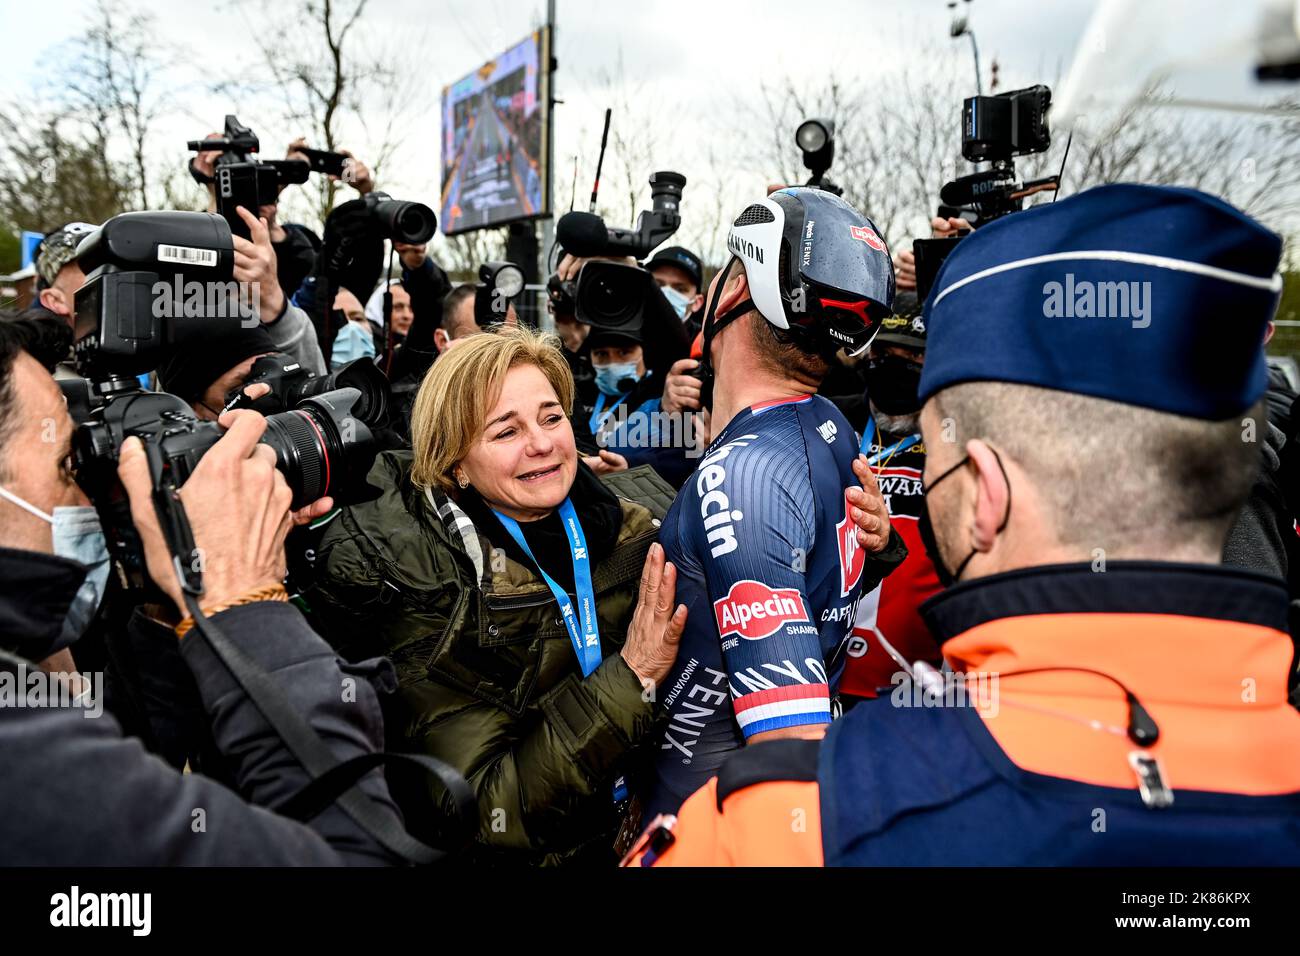 The 2022 Tour of Flanders from Antwerp (Antwerpen) to Oudenaarde. Mathieu Van Der Poel for team AlpecinFenix (NED) embraces his mother on the finish line after winning the stage. Stock Photo